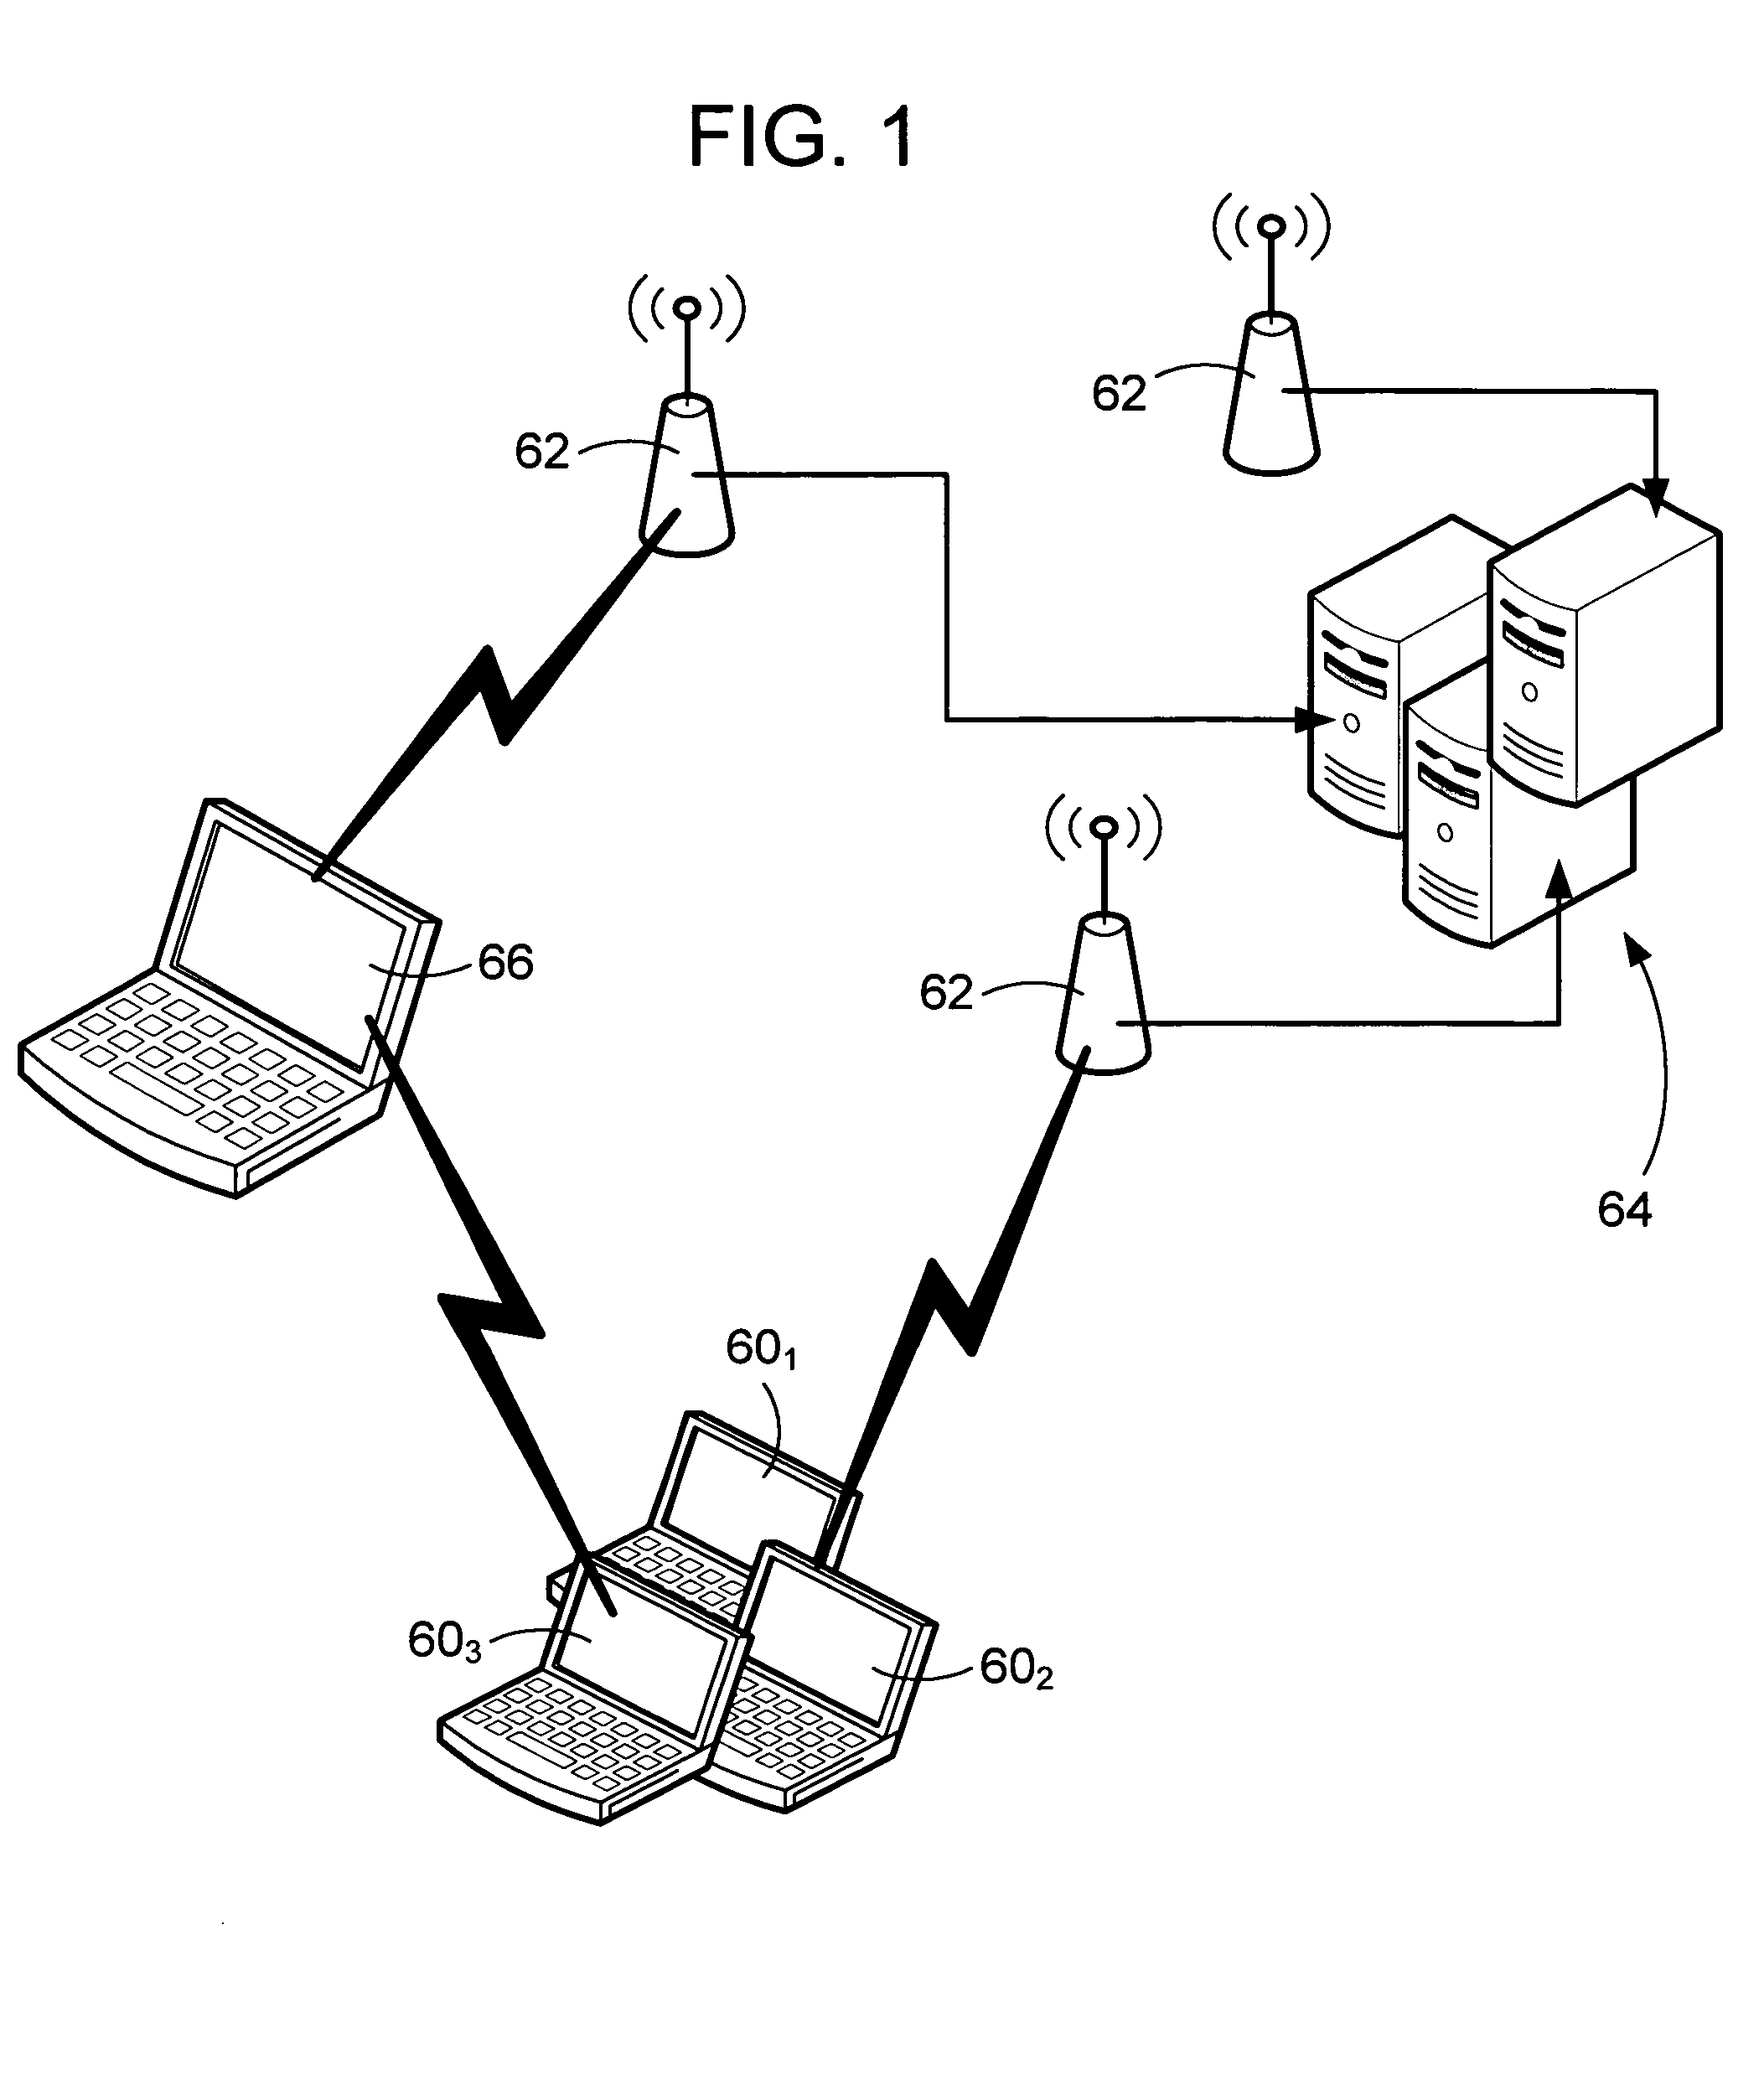 Method and apparatus for performing wireless diagnsotics and troubleshooting